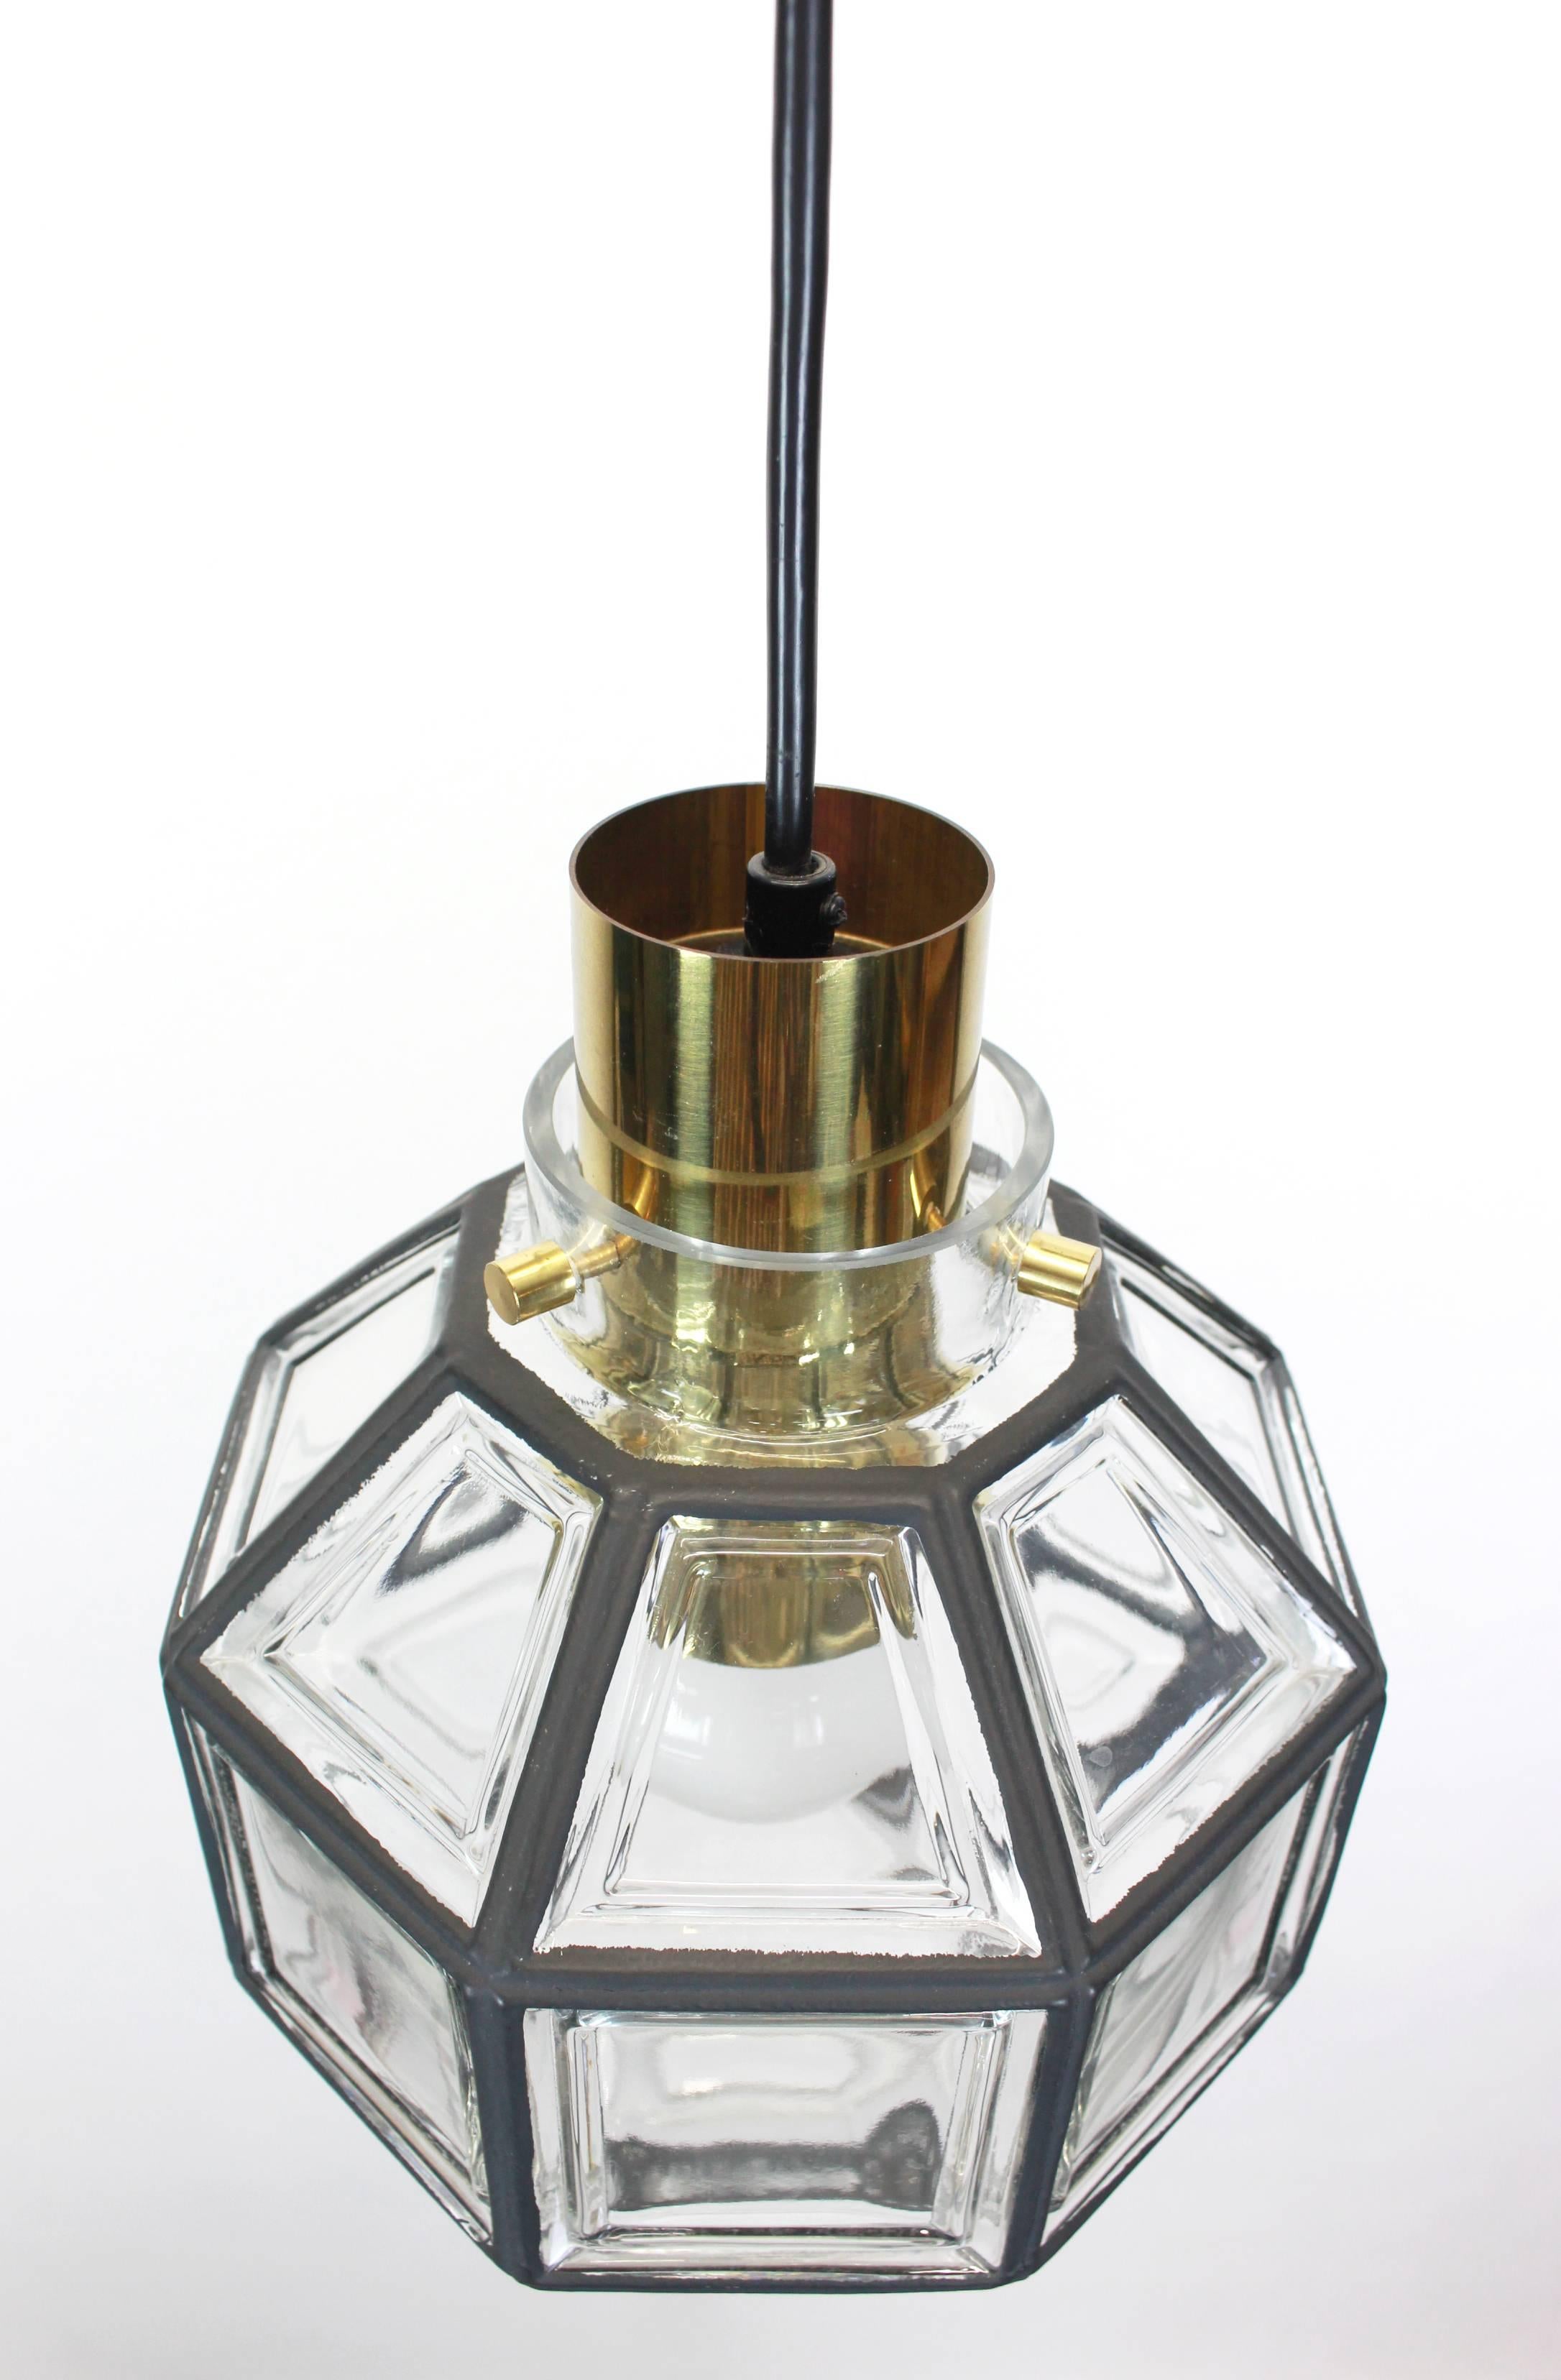 Minimalist iron and clear glass pendant light manufactured by Limburg Glashütte, Germany, circa 1960-1969. Octagonal shaped lantern and multifaceted clear glass.

High quality and in very good condition. Cleaned, well-wired and ready to